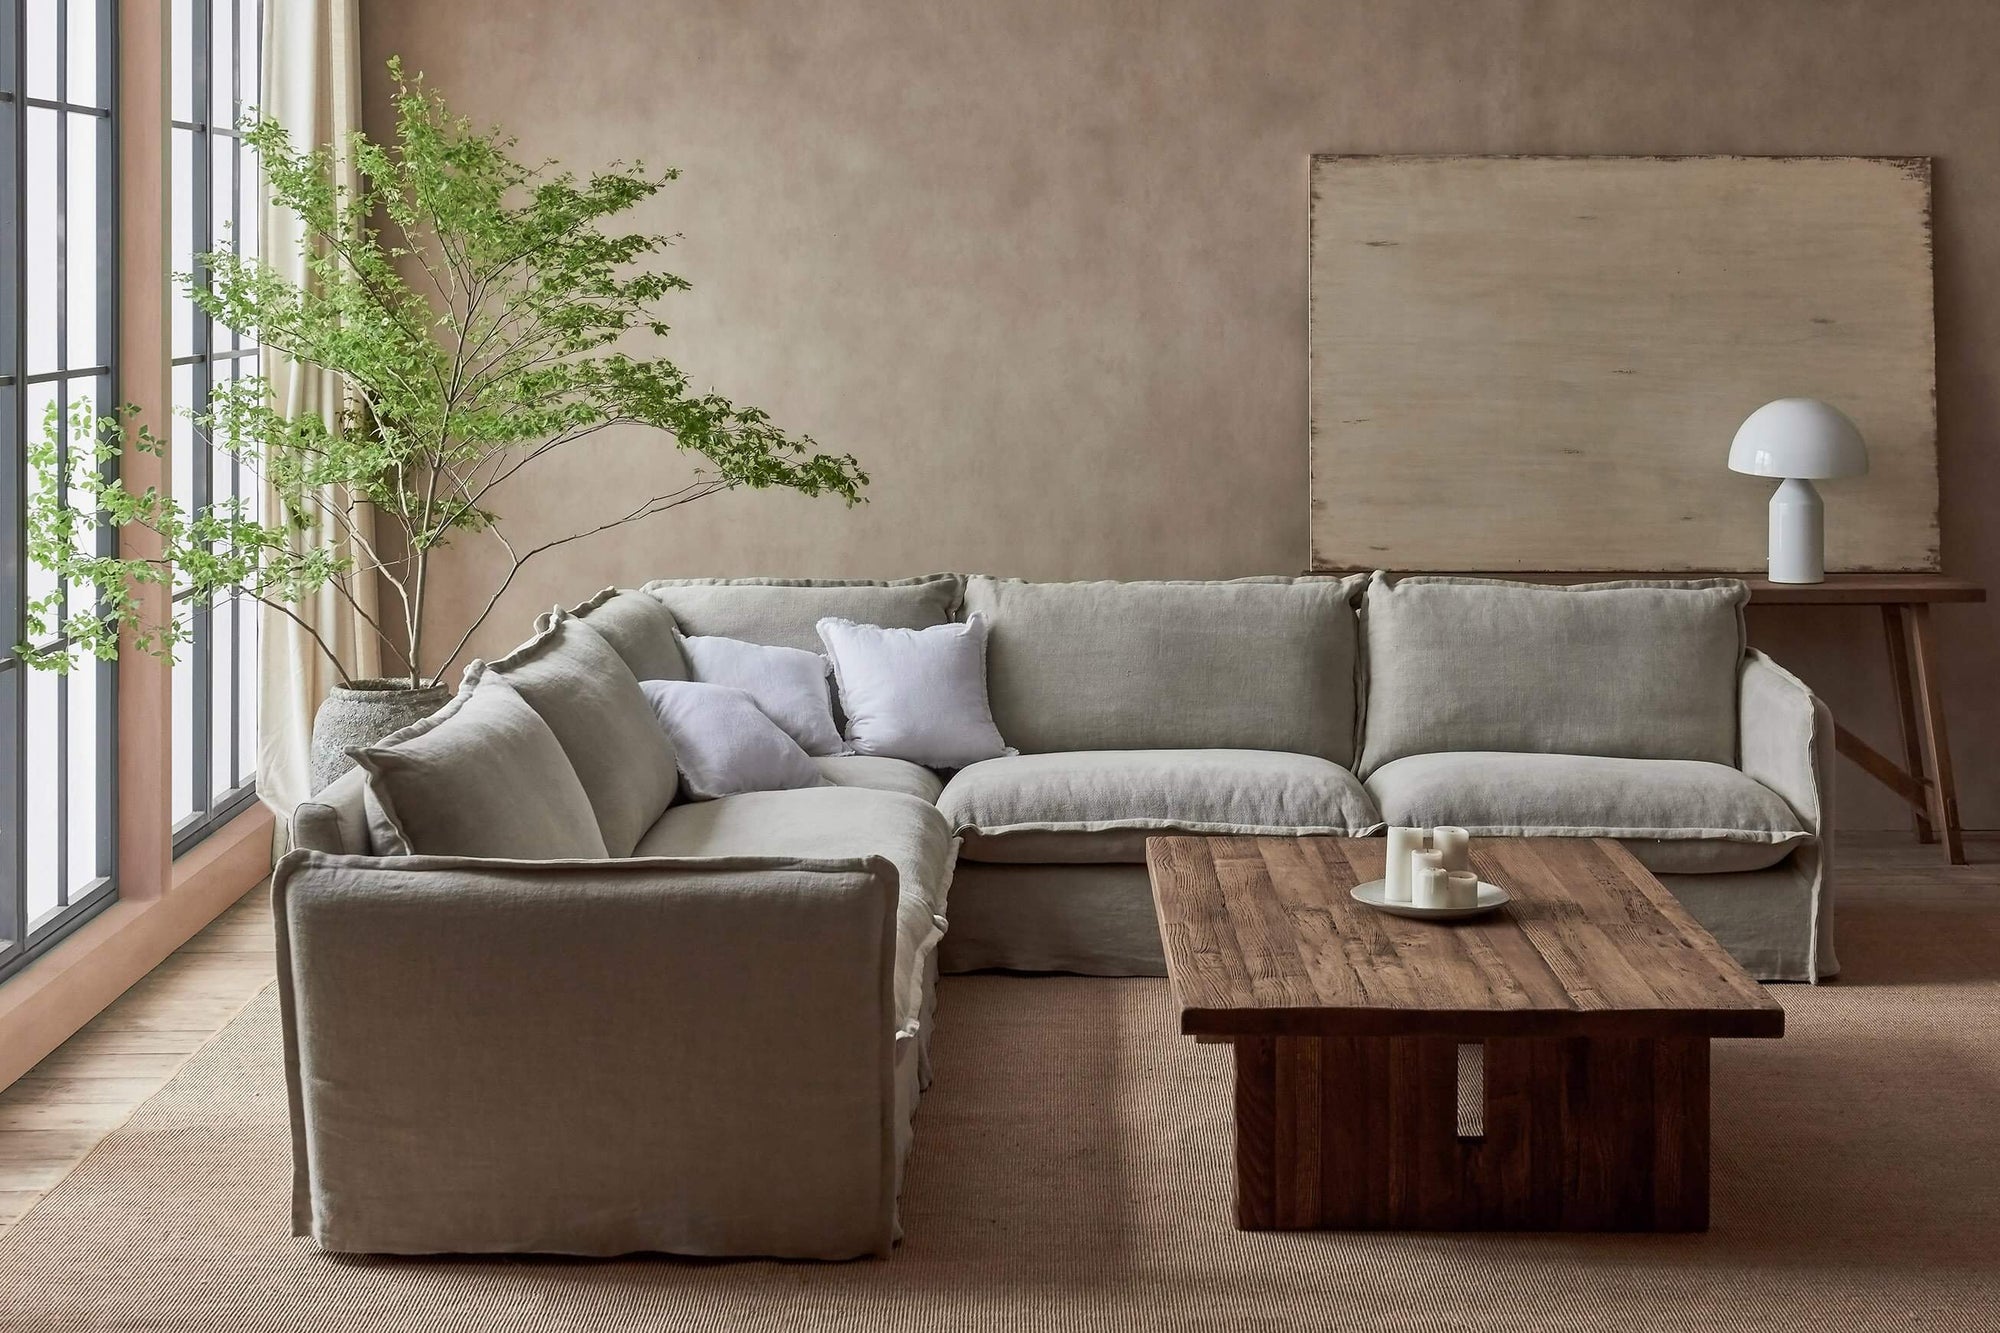 Neva Corner Sectional Sofa in Jasmine Rice, a light warm greige Medium Weight Linen, placed in a bright room with a Kai Coffee Table and a potted tree